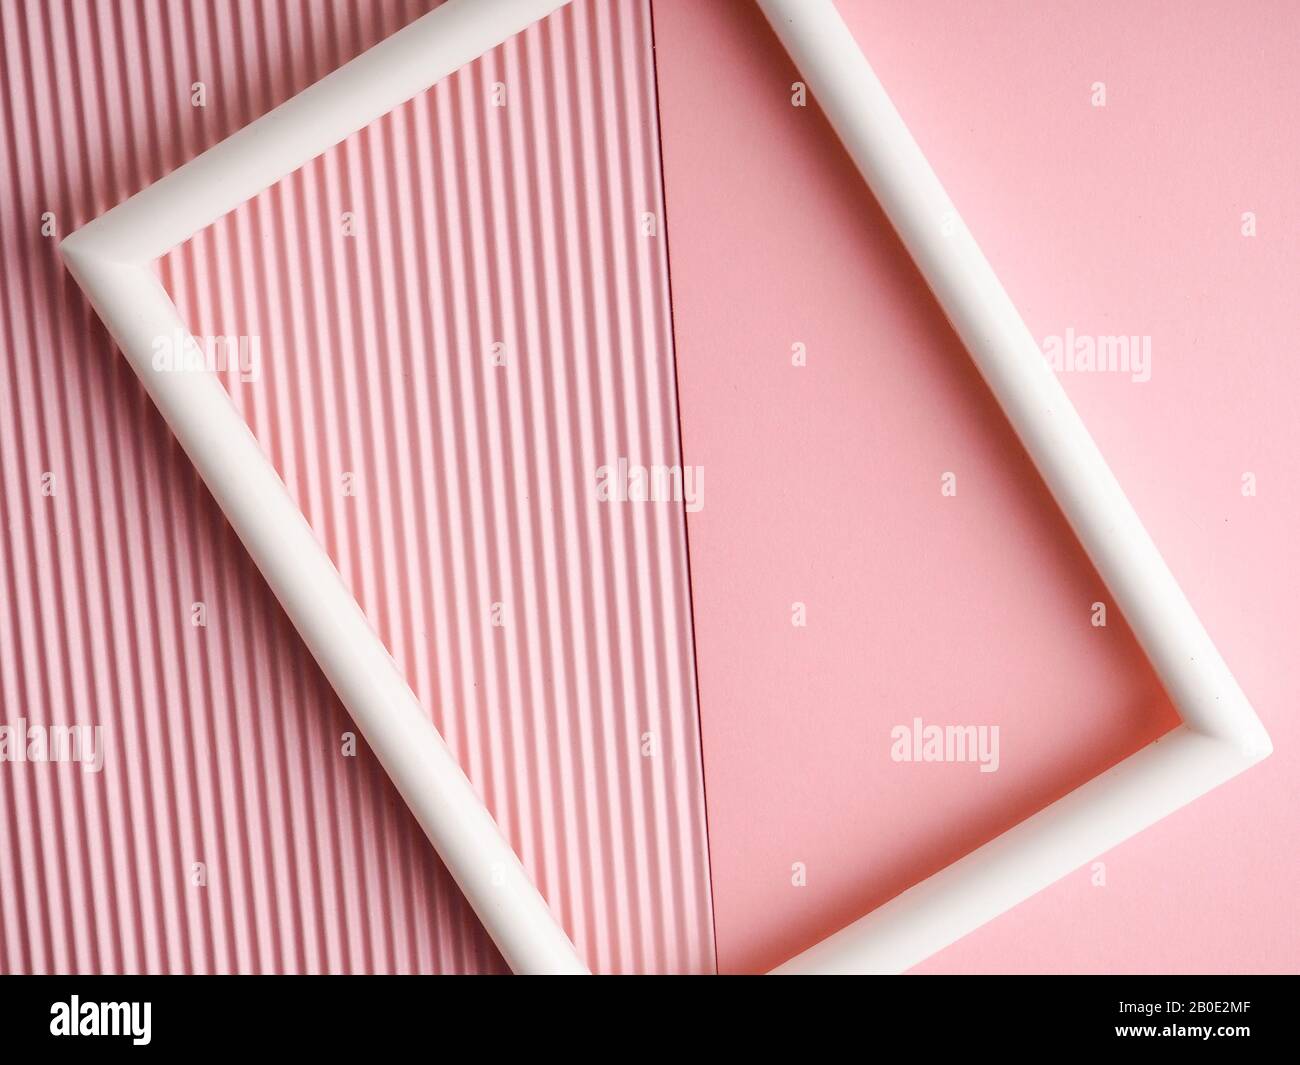 white frame on a pink background Stock Photo